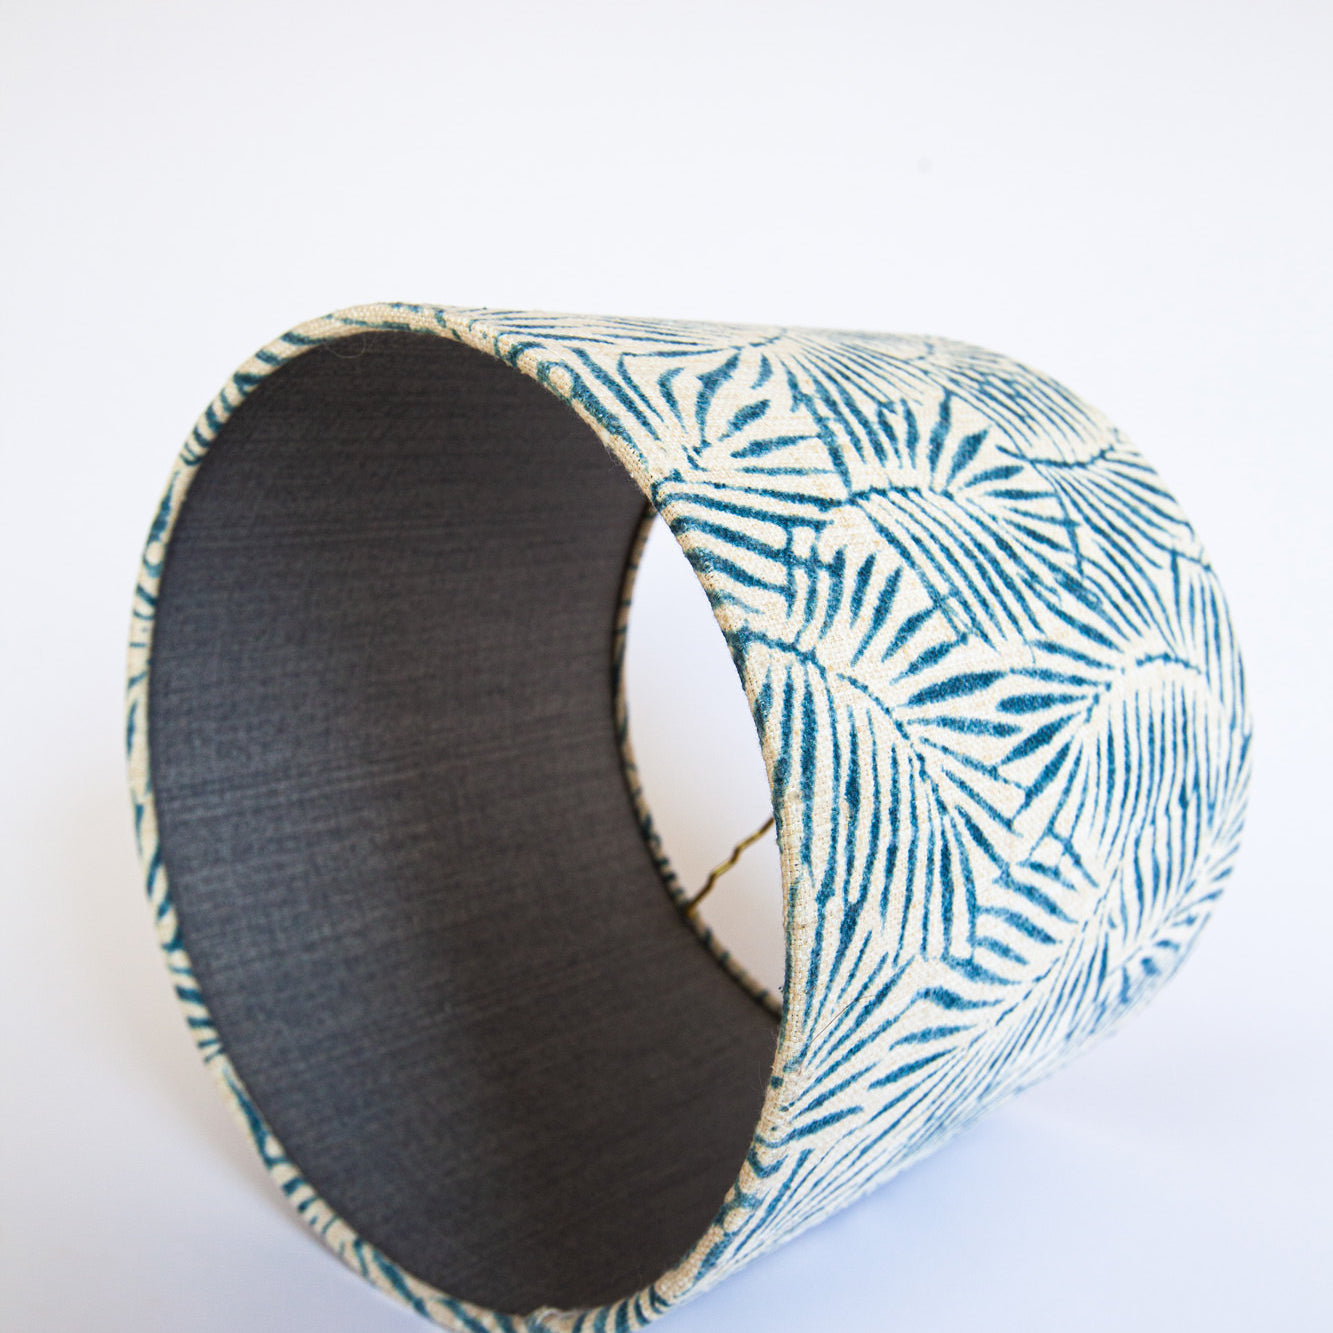 Nancylee - Blue and White Bamboo Linen Drum Lamp Shade